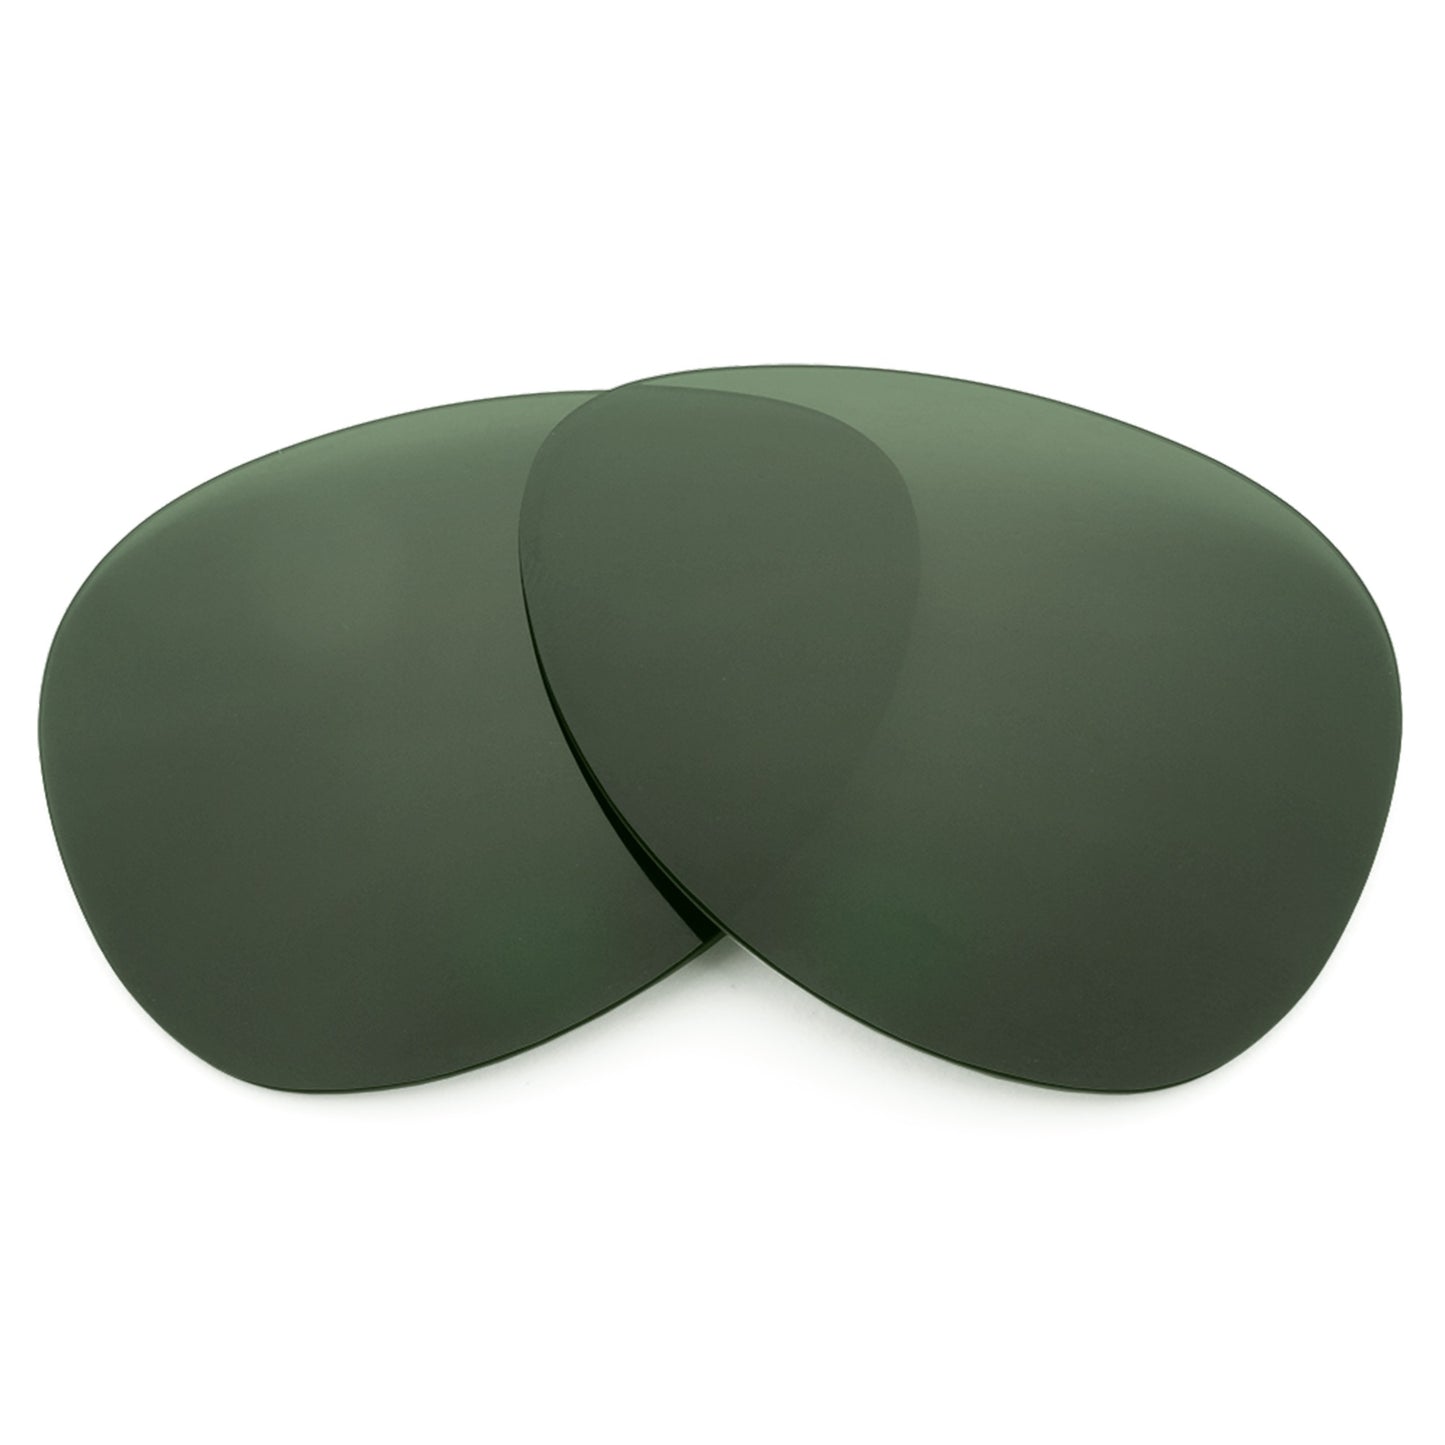 Revant replacement lenses for Ray-Ban New Aviator RB3625 55mm Non-Polarized Gray Green